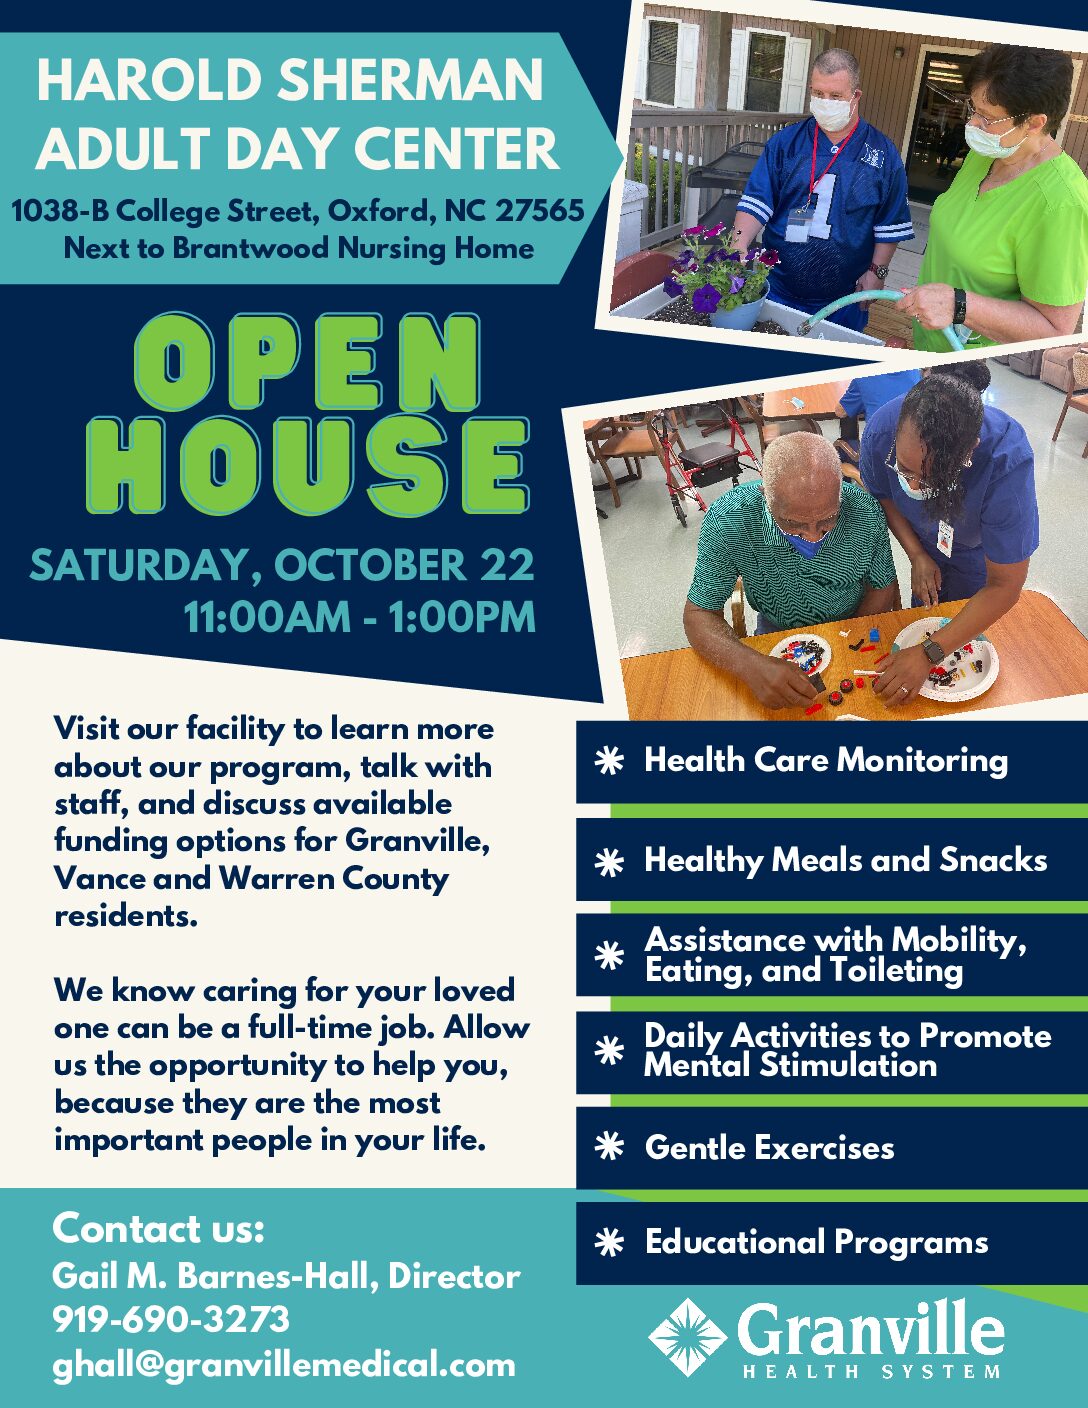 HAROLD SHERMAN ADULT DAY CENTER TO HOST 2nd OPEN HOUSE   ON OCTOBER 22 FROM 11:00 AM – 1:00 PM